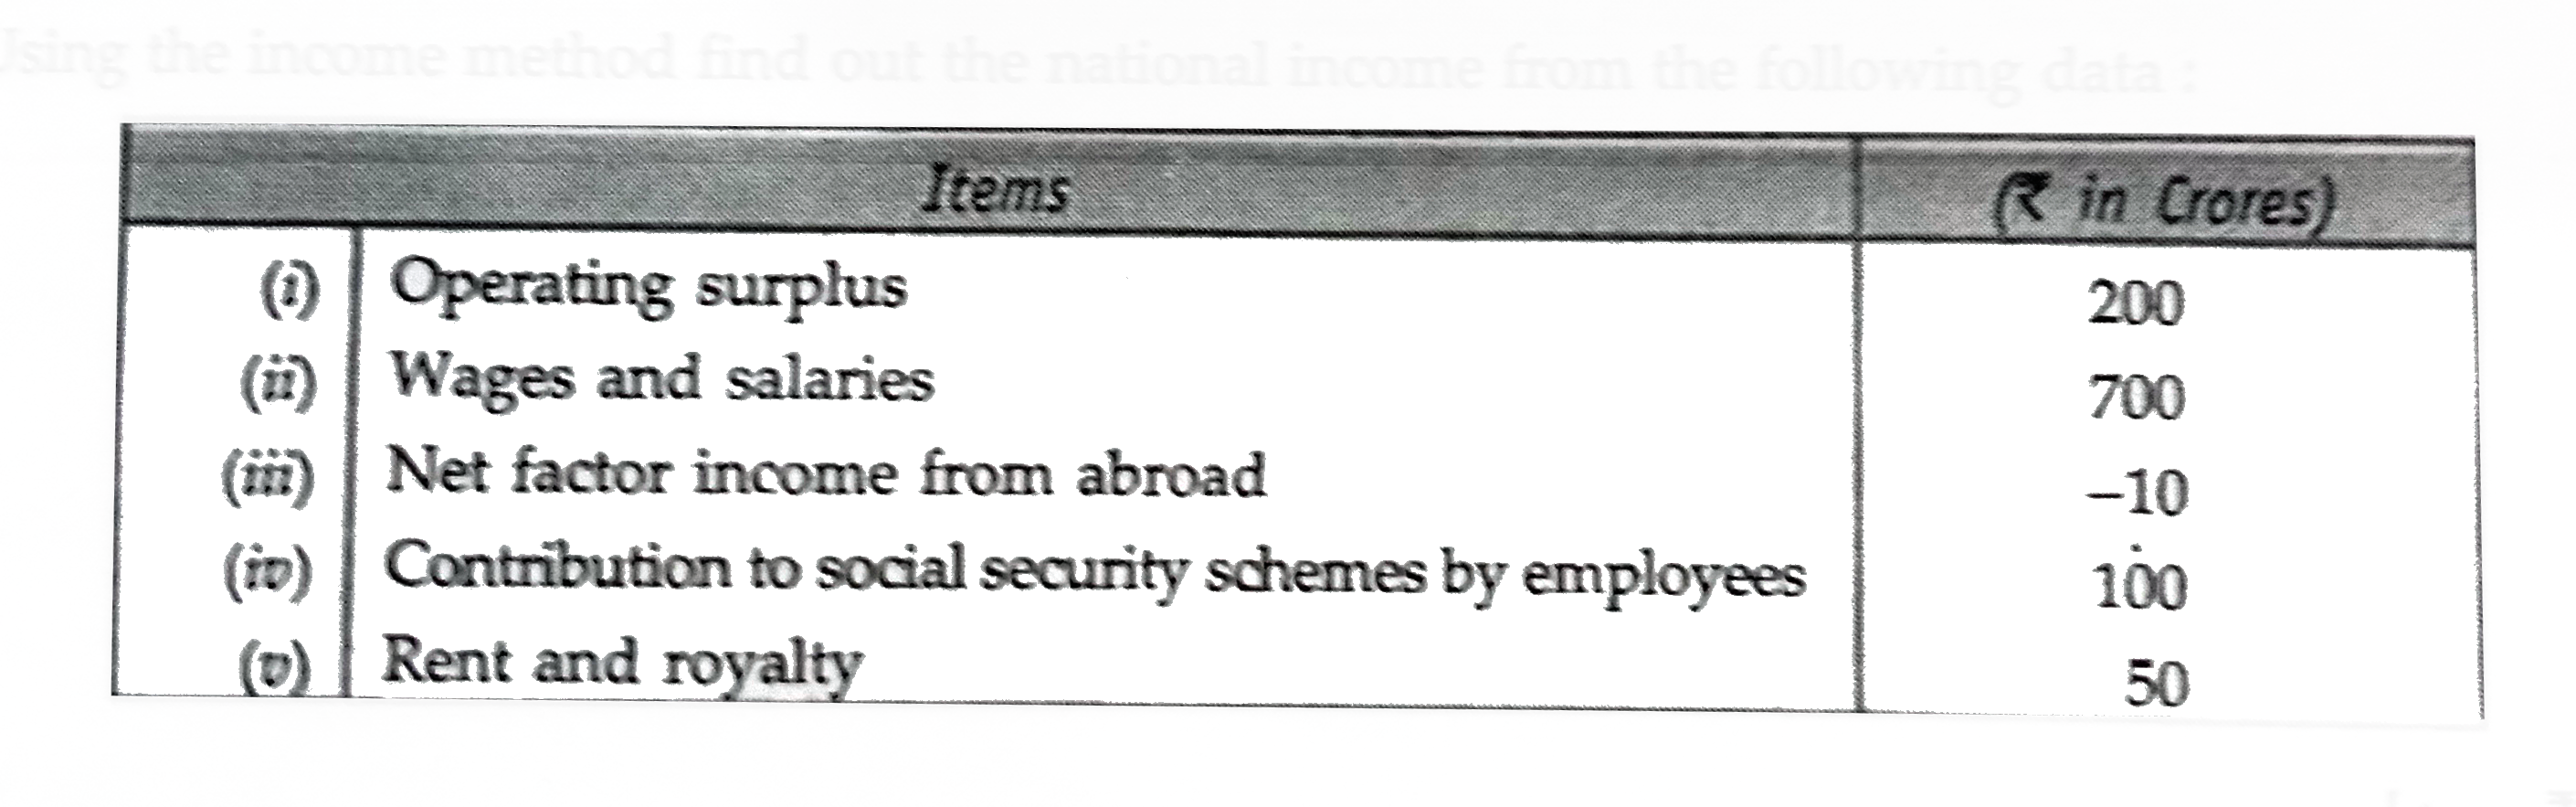 Using the income method find out the national income from the following data :